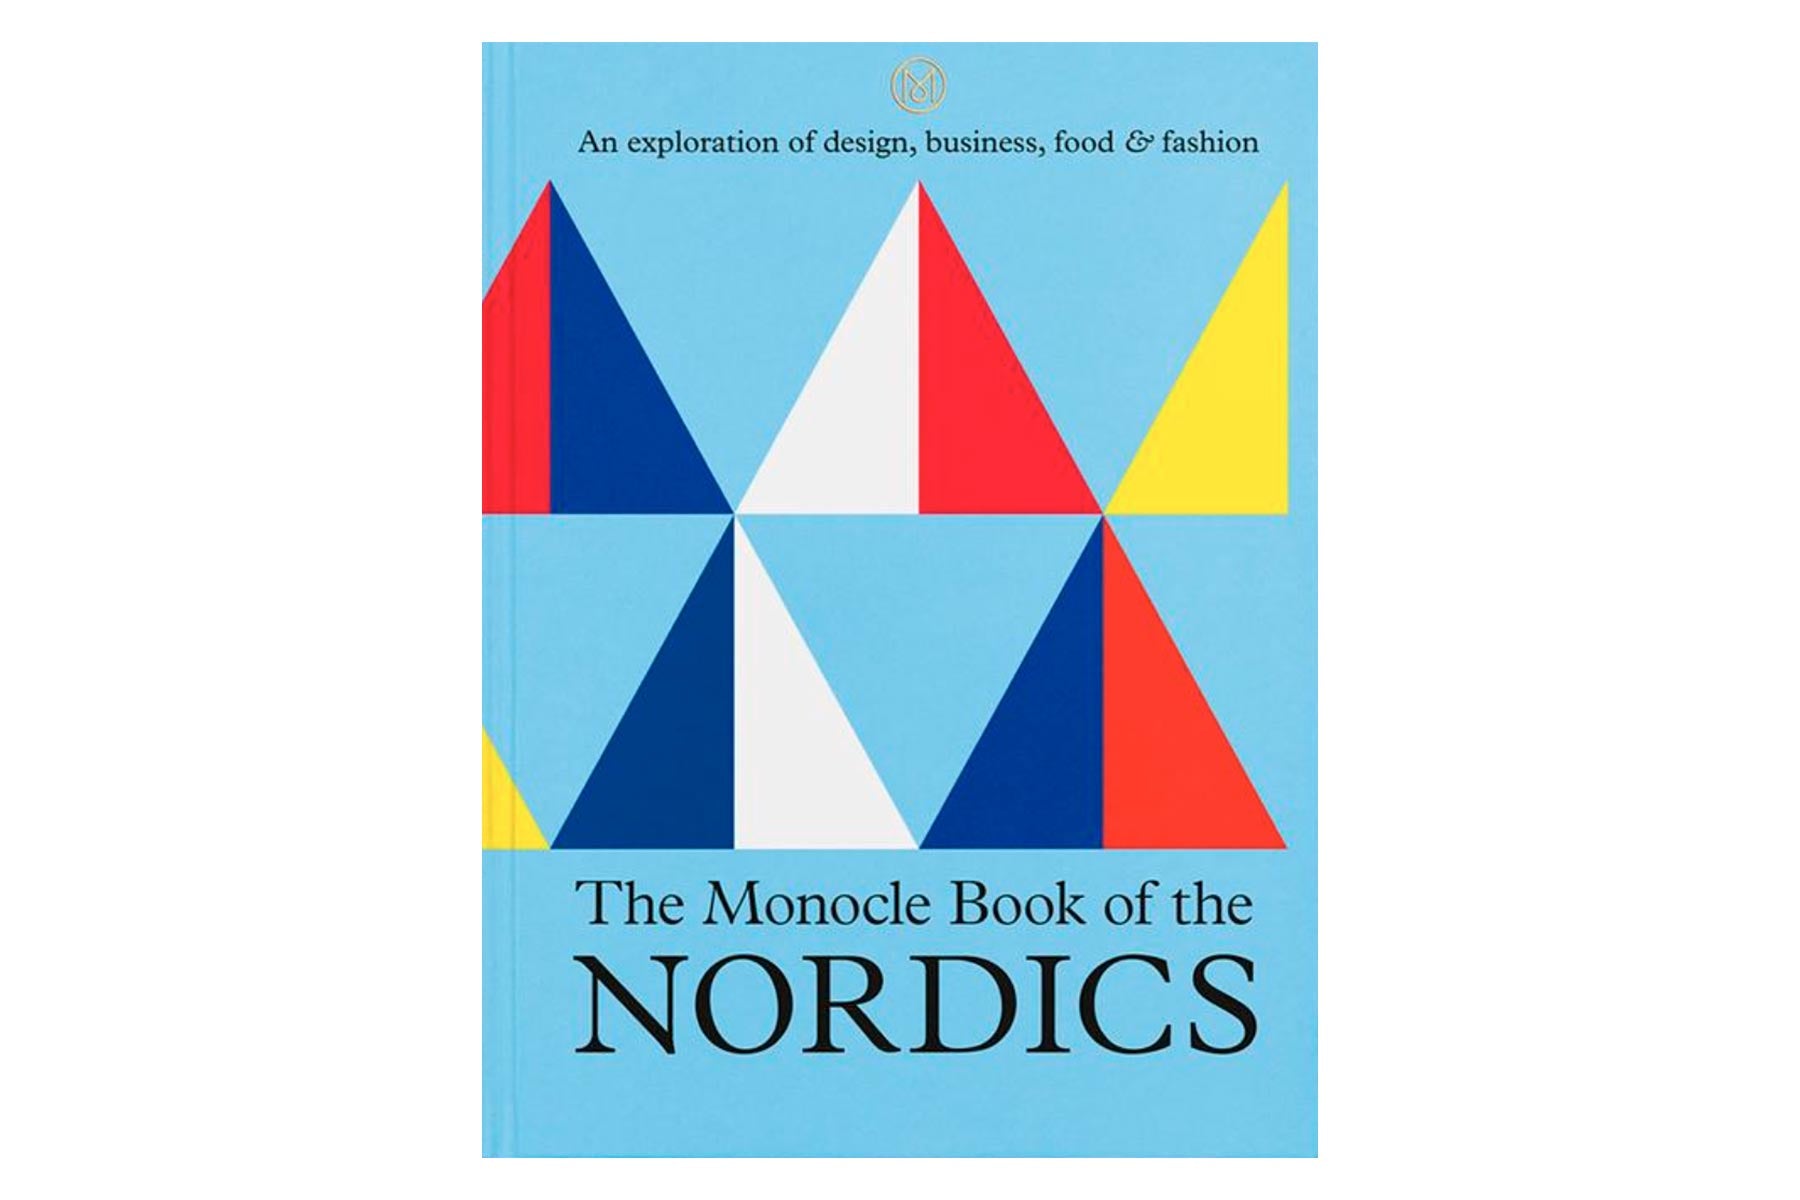 The Monocle Book of - The Nordics